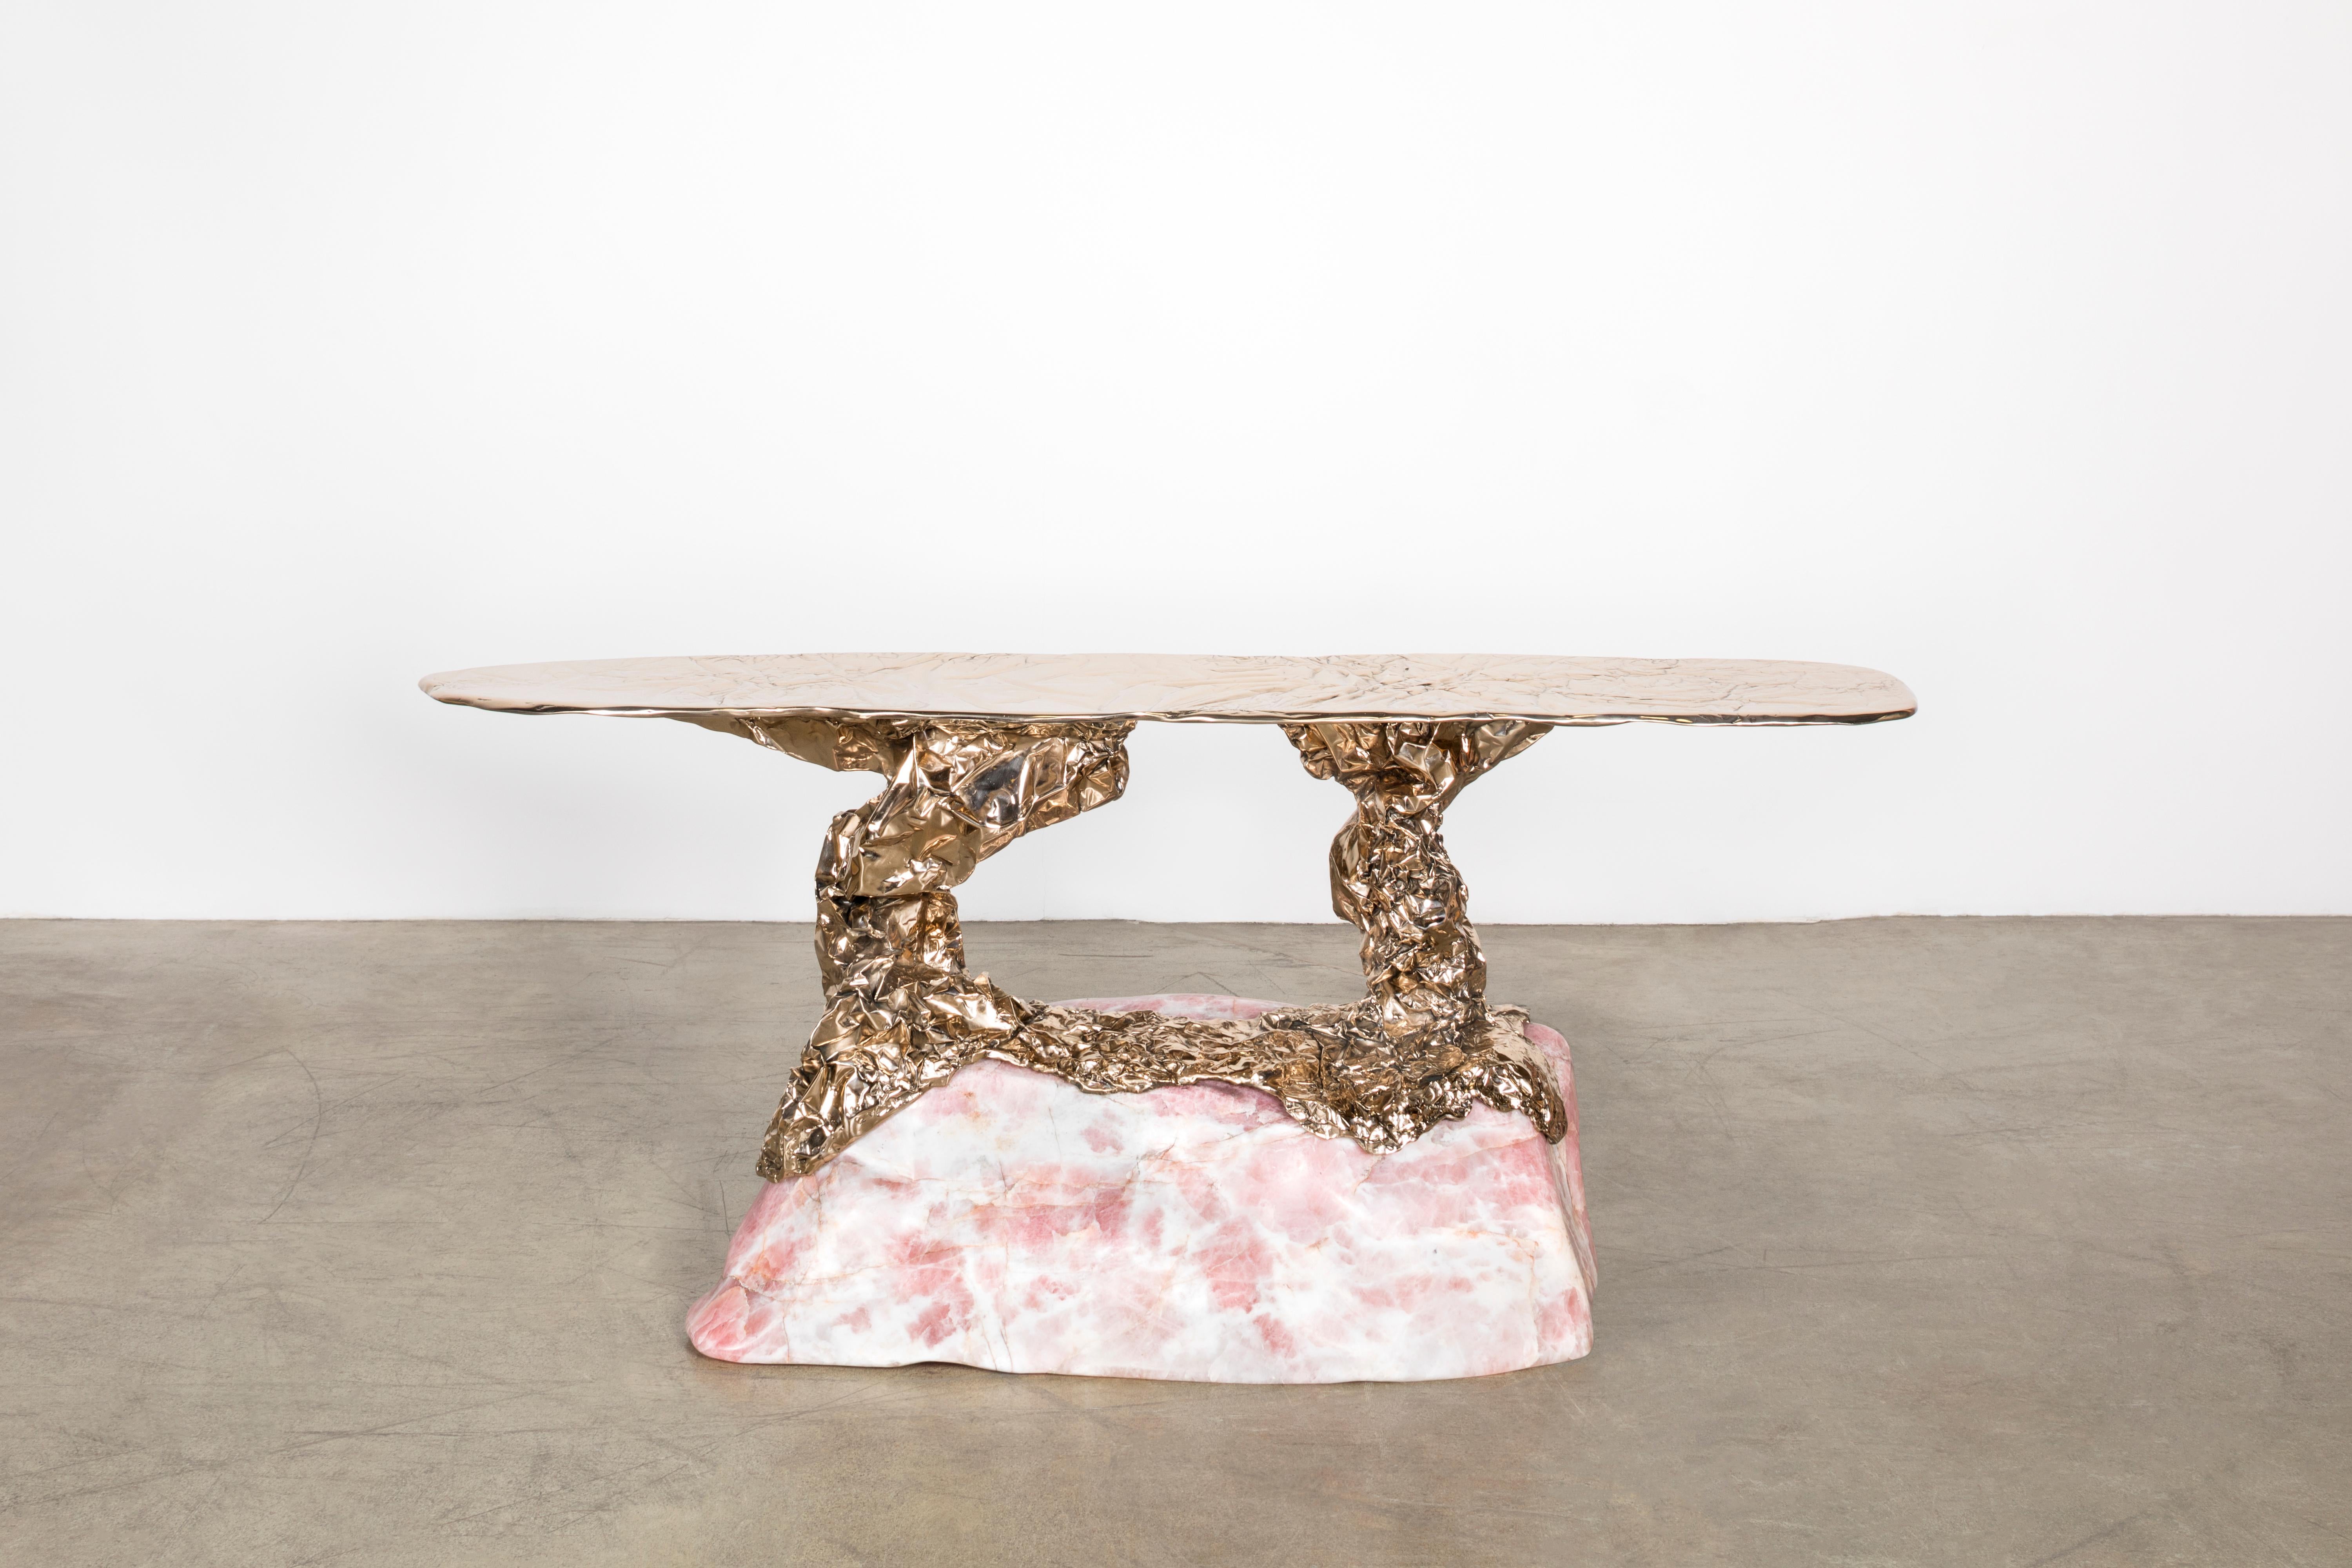 Misha Kahn [American, b. 1989]
Radiant Affection, 2022
Rose quartz, bronze
Measures: 28 x 65.75 x 18.25 inches
71 x 167 x 46 cm
Unique

Since 2017 Misha Kahn has produced tables, chairs, and consoles from his Rock series. Each function is